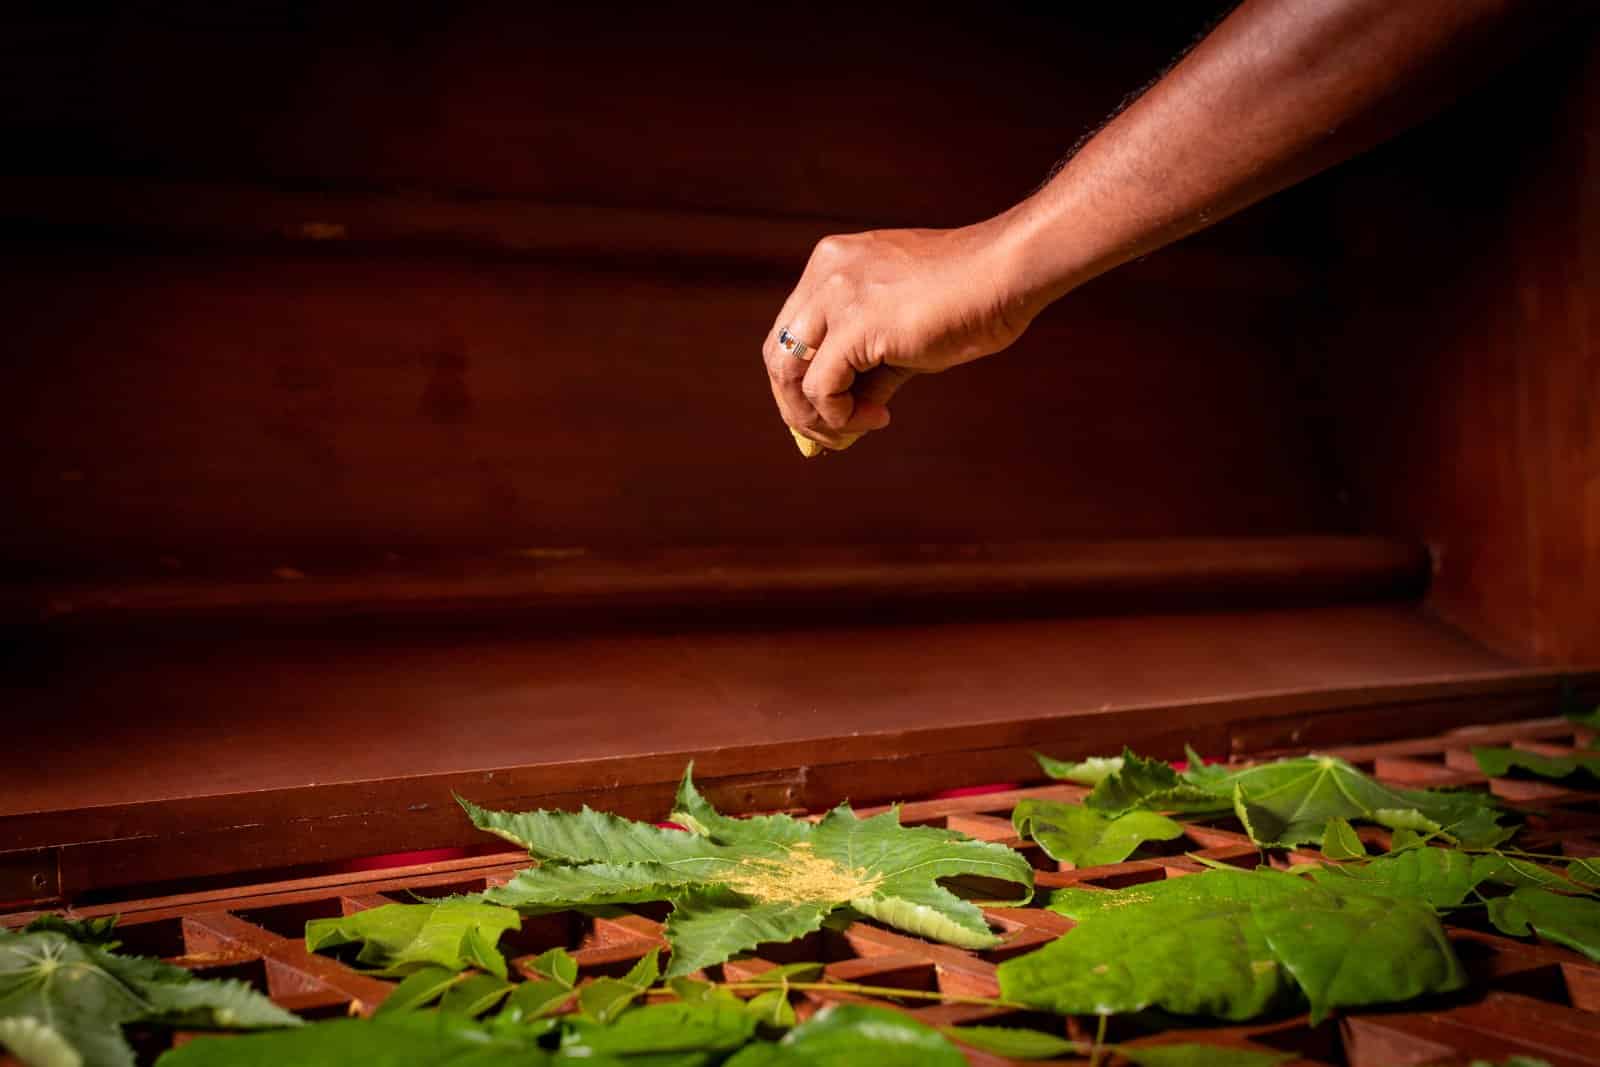 <p class="wp-caption-text">Image Credit: Shutterstock / Sajis De SIlva</p>  <p><span>Embarking on an Ayurvedic retreat in India is a journey into the heart of holistic wellness, offering a profound opportunity to heal, rejuvenate, and transform under the guidance of ancient wisdom.</span></p> <p><span>As you immerse yourself in this experience, remember that the path to wellness is personal and universal, reflecting the interconnectedness of all life. </span><span>With an open heart and mind, your Ayurvedic retreat can be a gateway to deeper health, harmony, and understanding, setting the foundation for a balanced and vibrant life.</span></p> <p><span>More Articles Like This…</span></p> <p><a href="https://thegreenvoyage.com/barcelona-discover-the-top-10-beach-clubs/"><span>Barcelona: Discover the Top 10 Beach Clubs</span></a></p> <p><a href="https://thegreenvoyage.com/top-destination-cities-to-visit/"><span>2024 Global City Travel Guide – Your Passport to the World’s Top Destination Cities</span></a></p> <p><a href="https://thegreenvoyage.com/exploring-khao-yai-a-hidden-gem-of-thailand/"><span>Exploring Khao Yai 2024 – A Hidden Gem of Thailand</span></a></p> <p><span>The post <a href="https://passingthru.com/guide-to-indias-ayurvedic-hideaways/">Comprehensive Guide to India’s Ayurvedic Hideaways</a> republished on </span><a href="https://passingthru.com/"><span>Passing Thru</span></a><span> with permission from </span><a href="https://thegreenvoyage.com/"><span>The Green Voyage</span></a><span>.</span></p> <p><span>Featured Image Credit: Shutterstock / Poznyakov.</span></p> <p><span>For transparency, this content was partly developed with AI assistance and carefully curated by an experienced editor to be informative and ensure accuracy.</span></p>